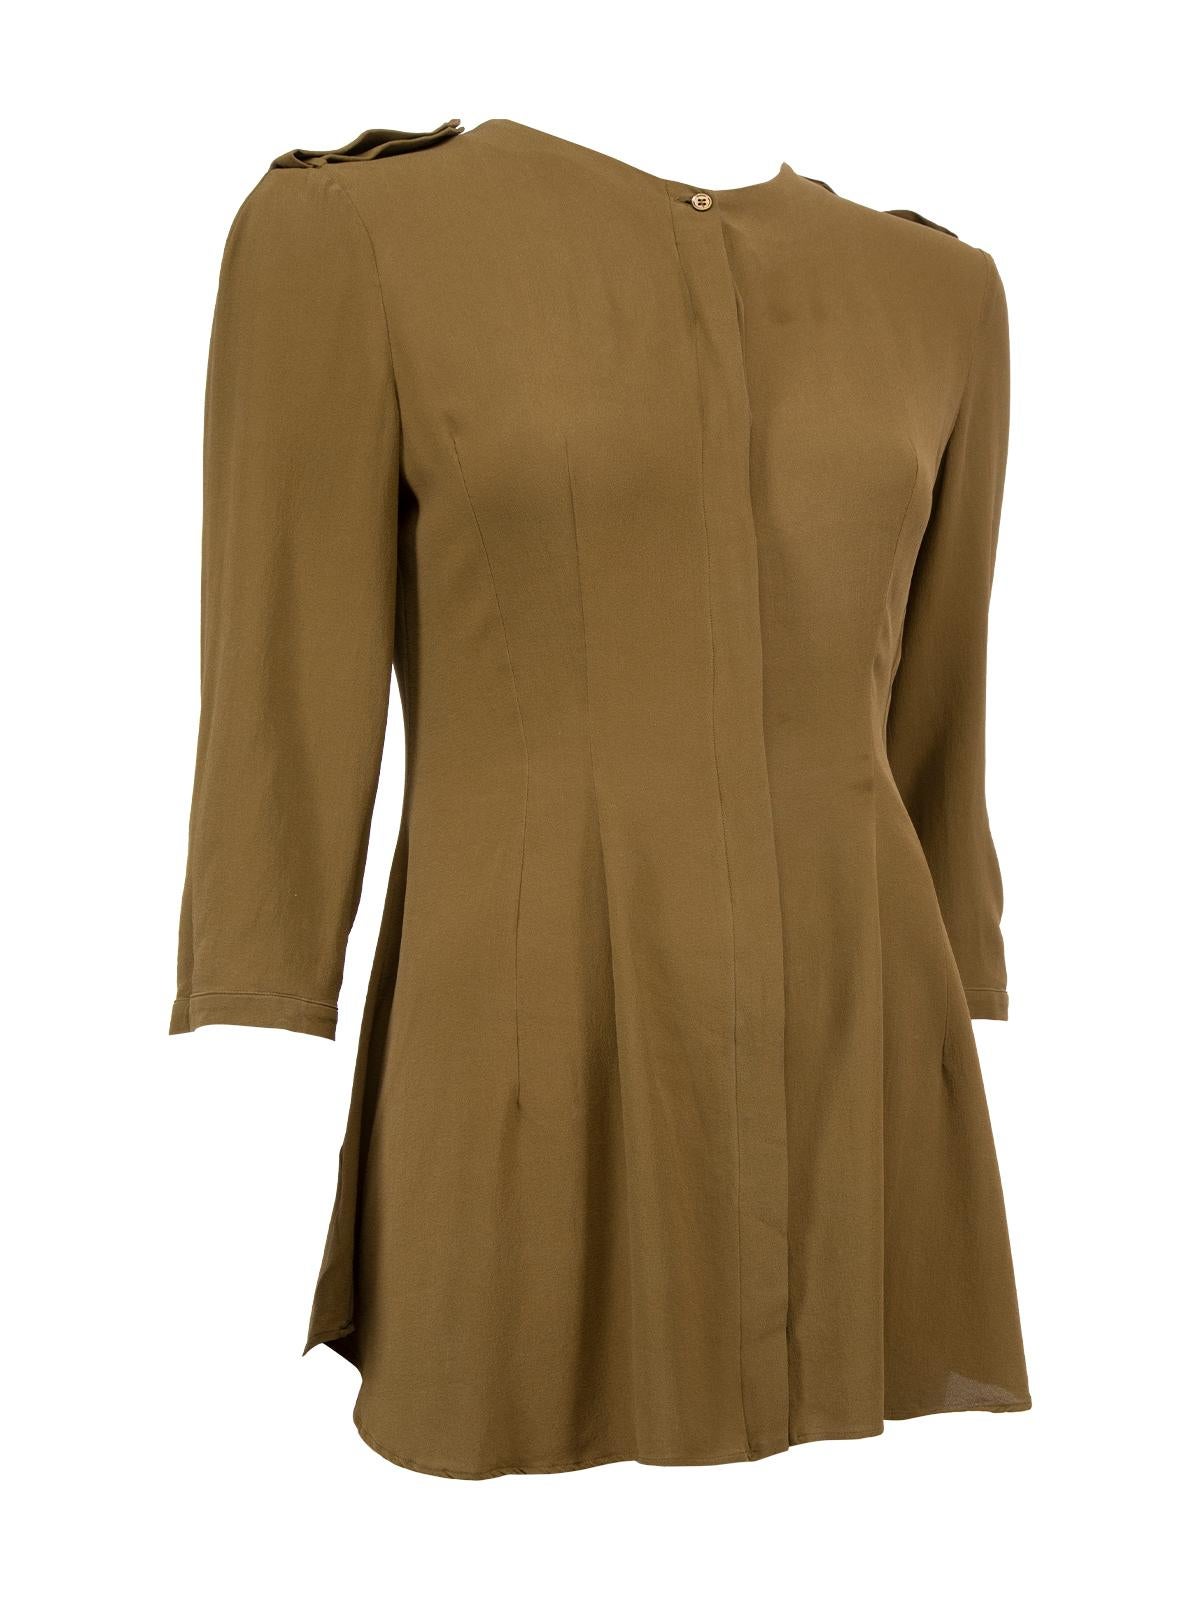 CONDITION is Very good. Hardly any visible wear to blouse is evident on this used Alexander McQueen designer resale item. Details Khaki Silk Loose-fit 3/4 sleeves Longline Button up Made in Italy Composition 100% Silk Care instructions: Professional